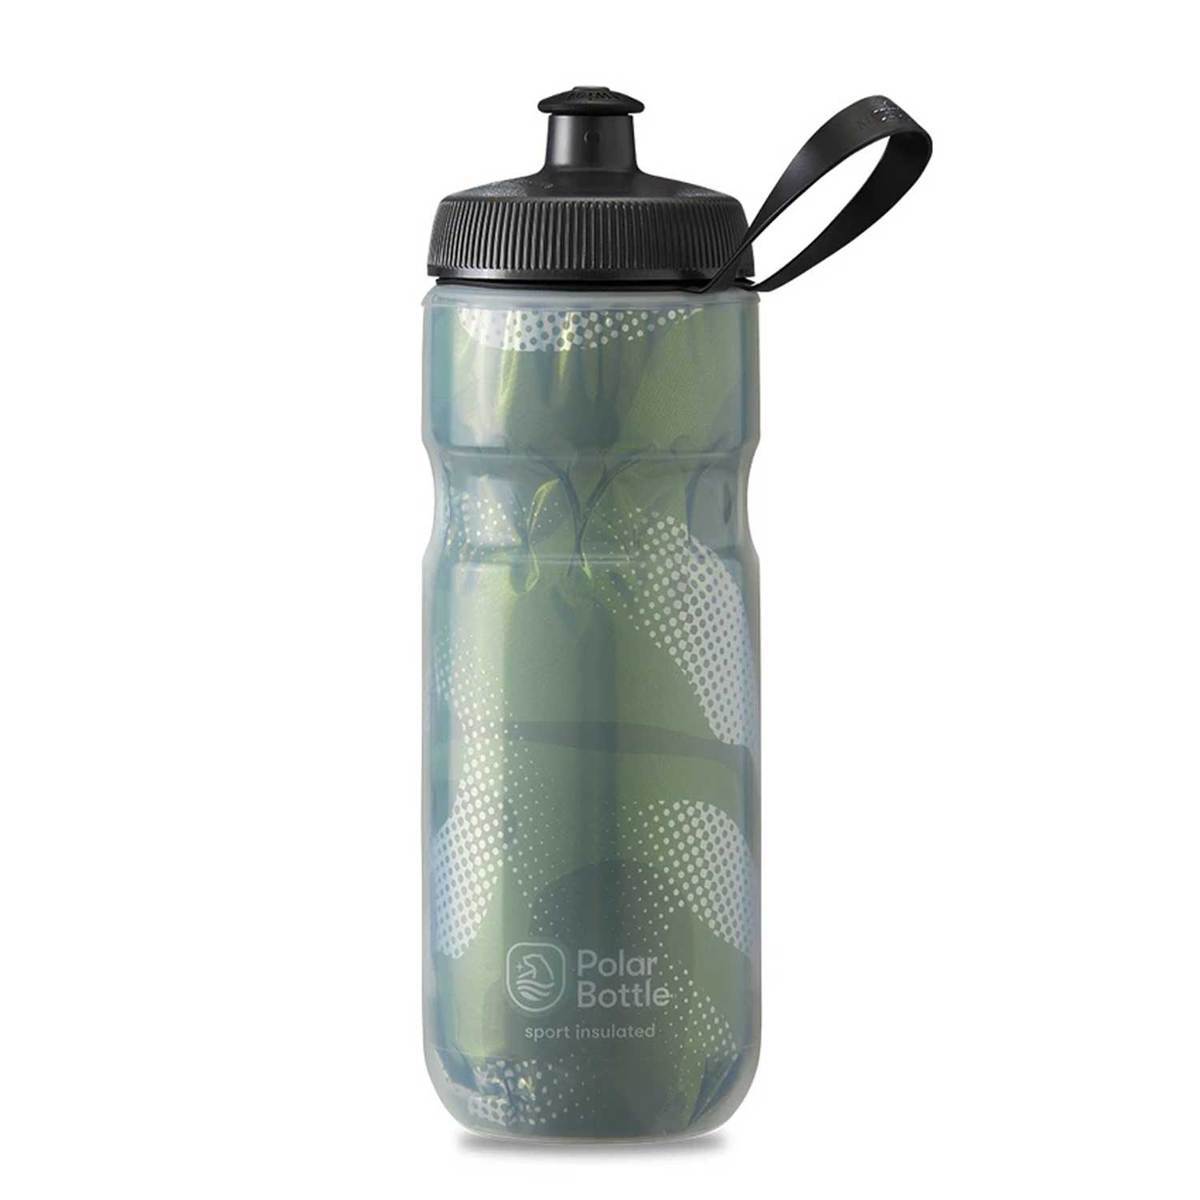 Cannon Sports Squeeze Water Bottle with Straw Lid, 34 oz, Black, Pack of 6